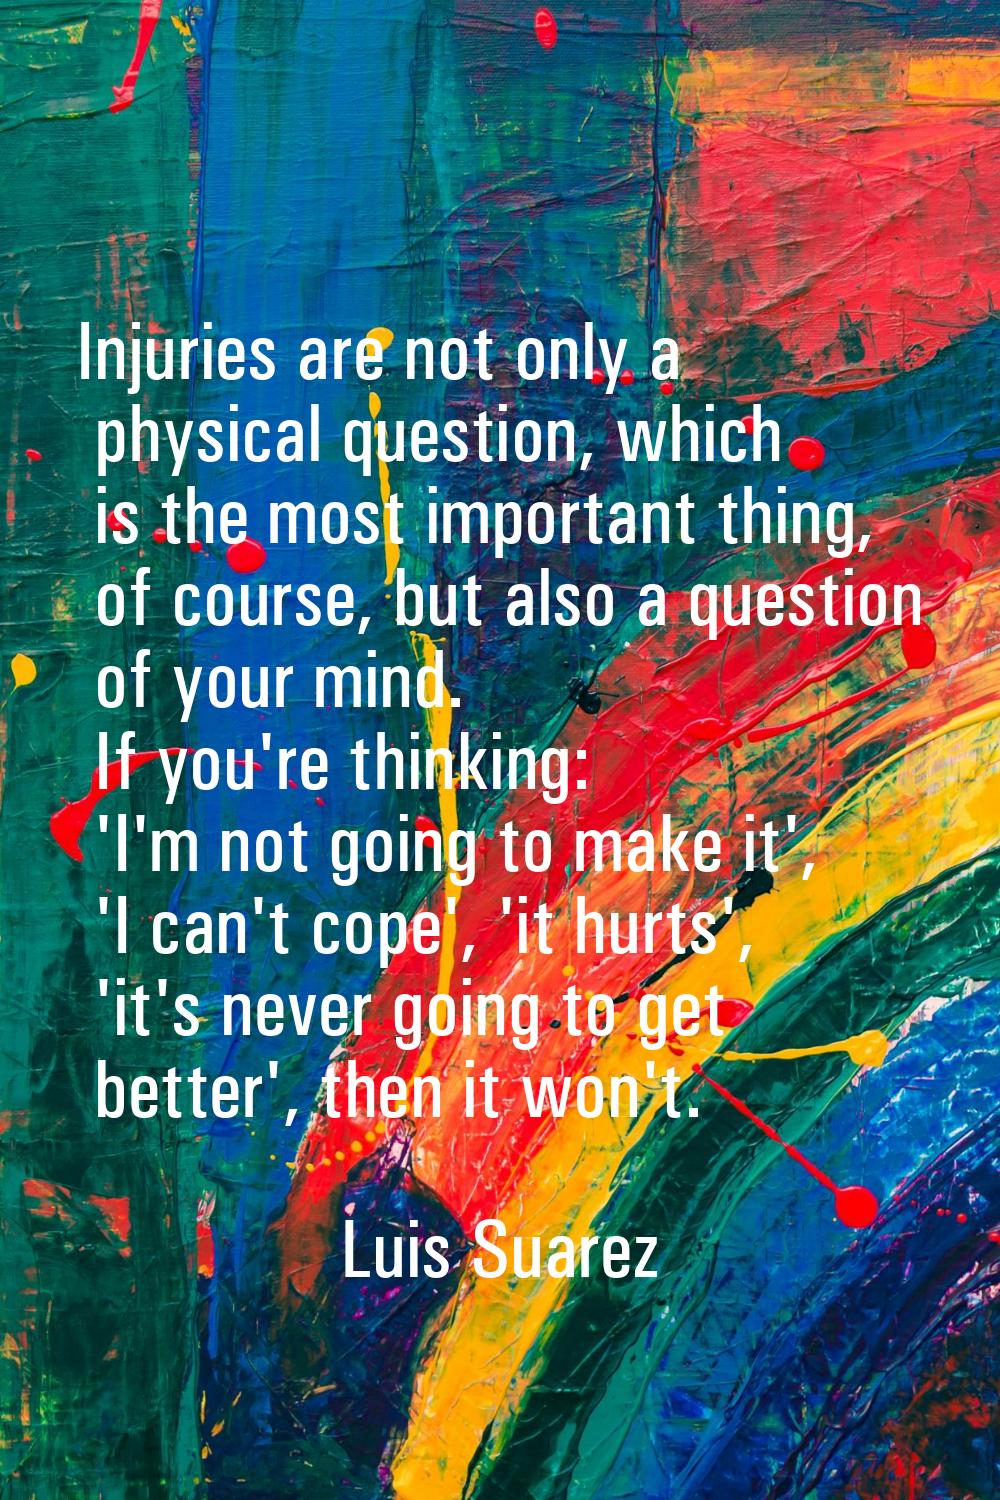 Injuries are not only a physical question, which is the most important thing, of course, but also a